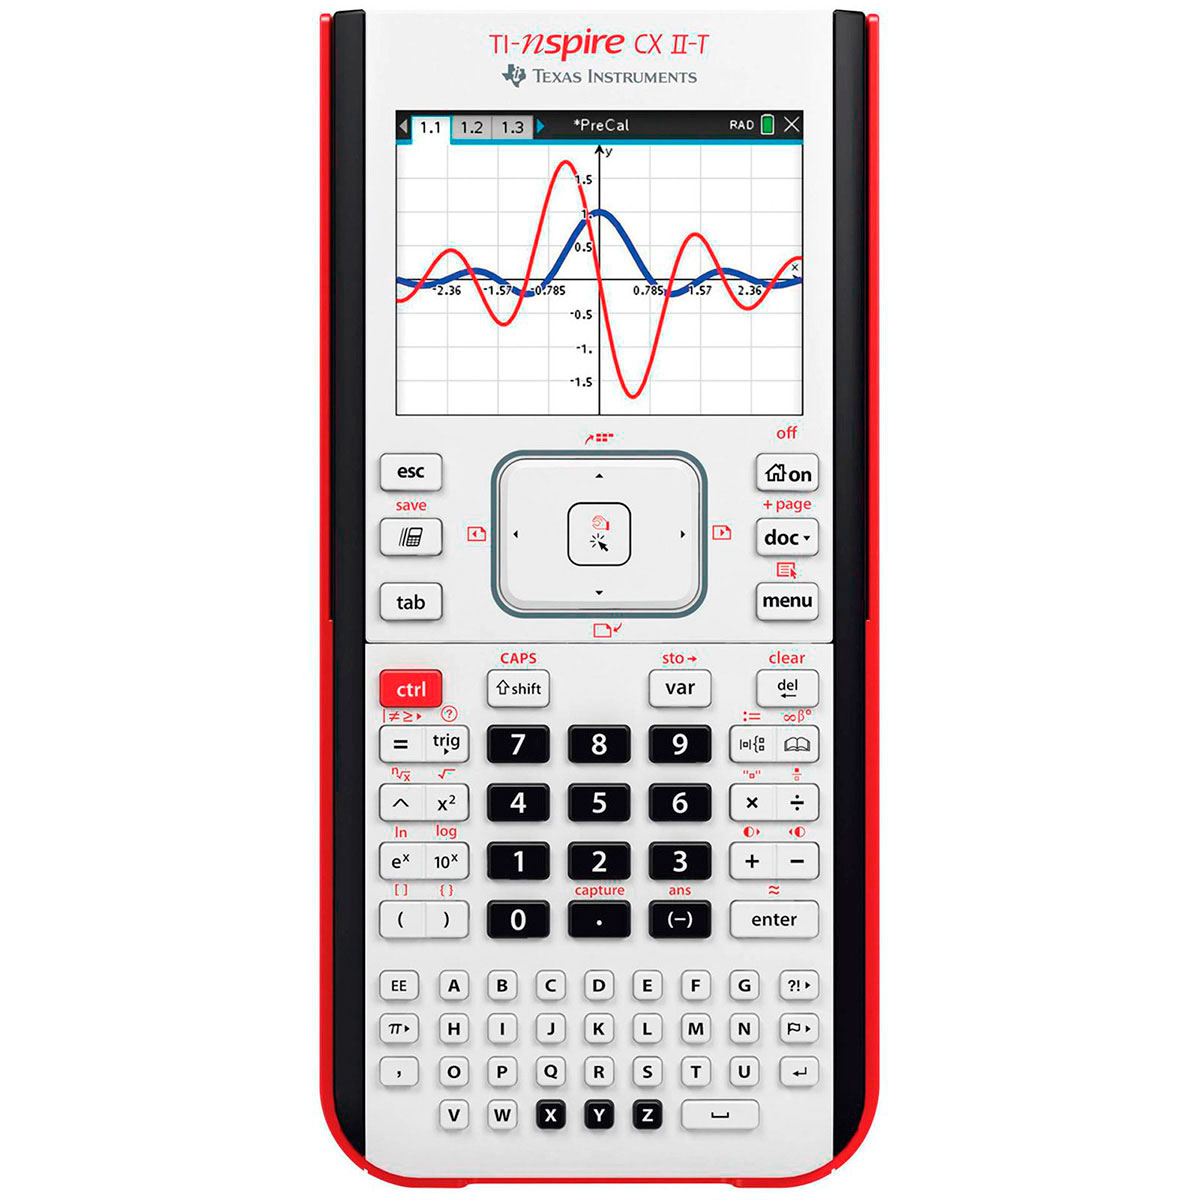 glimt Grunde frost Texas Instruments Lommeregner TI NSpire CX II-T (Grafisk)